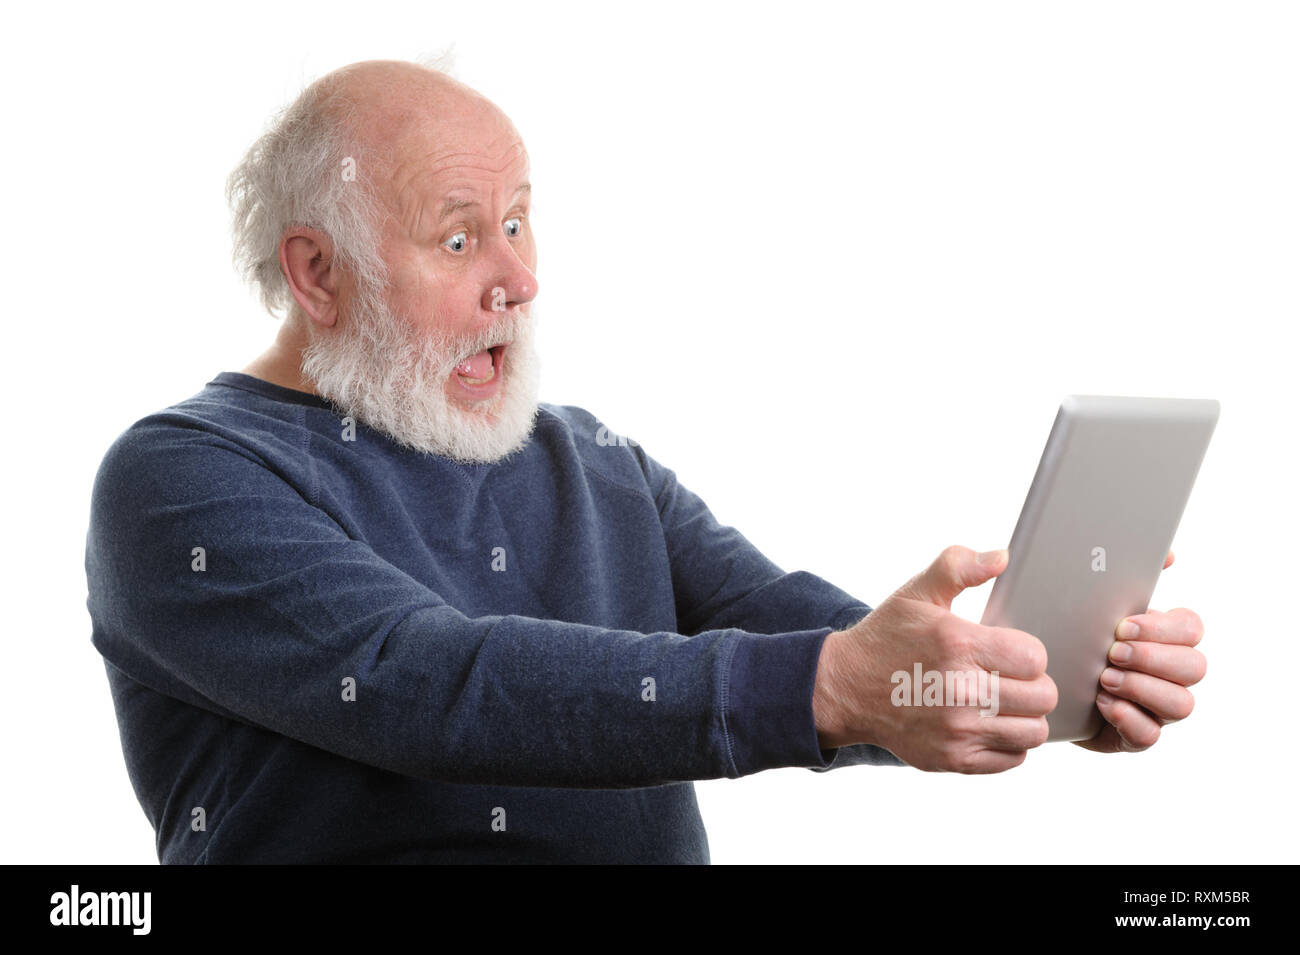 Funny shocked senior man using tablet computer isolated on white Stock Photo